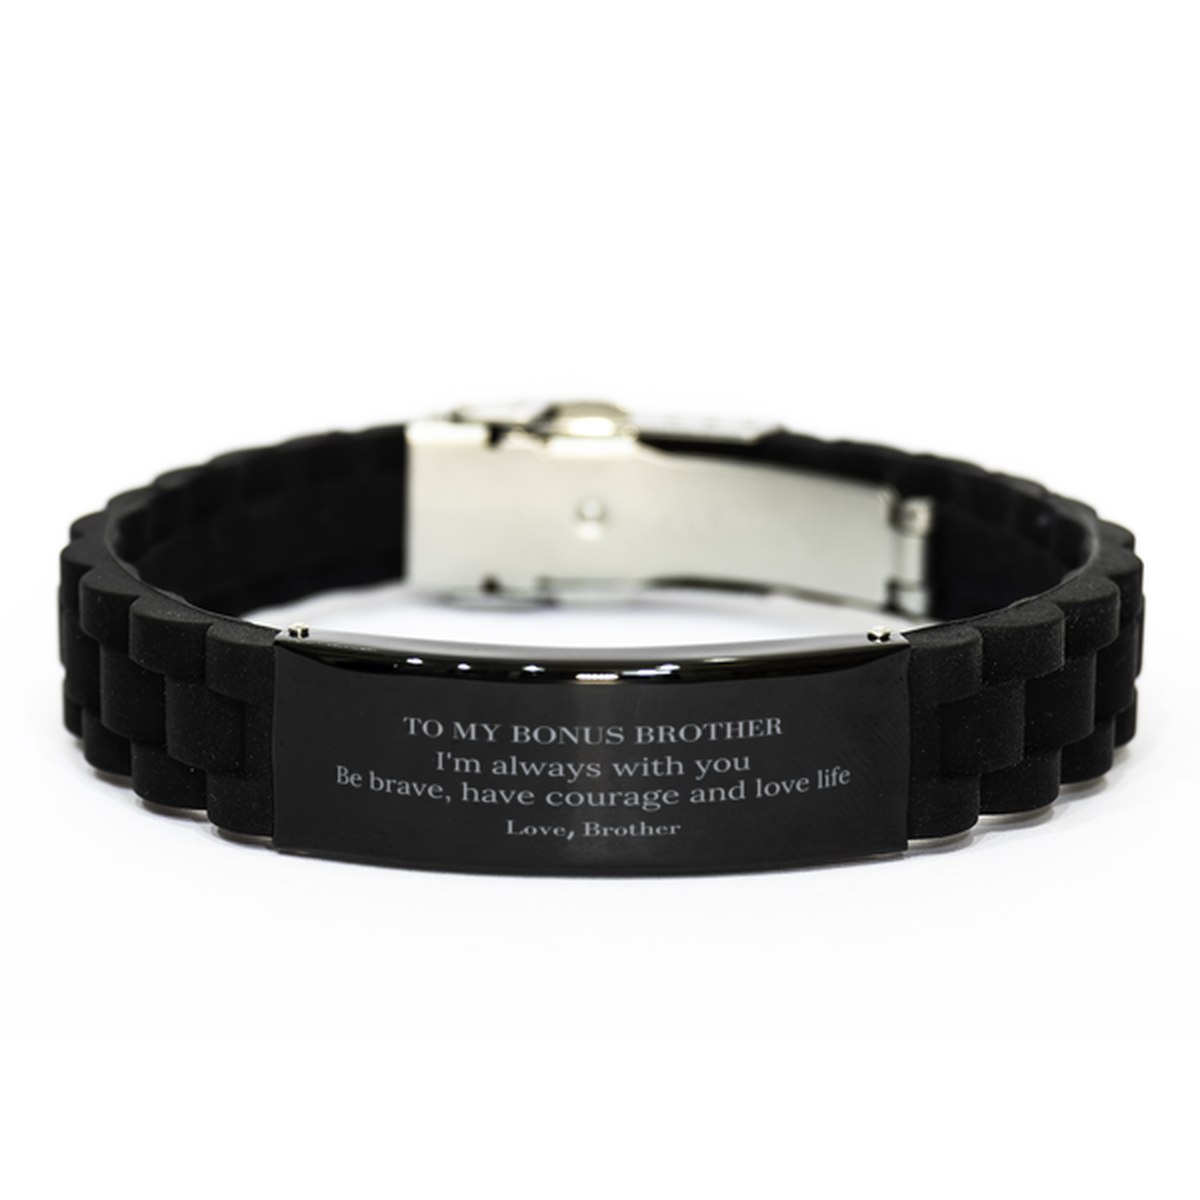 To My Bonus Brother Gifts from Brother, Unique Black Glidelock Clasp Bracelet Inspirational Christmas Birthday Graduation Gifts for Bonus Brother I'm always with you. Be brave, have courage and love life. Love, Brother